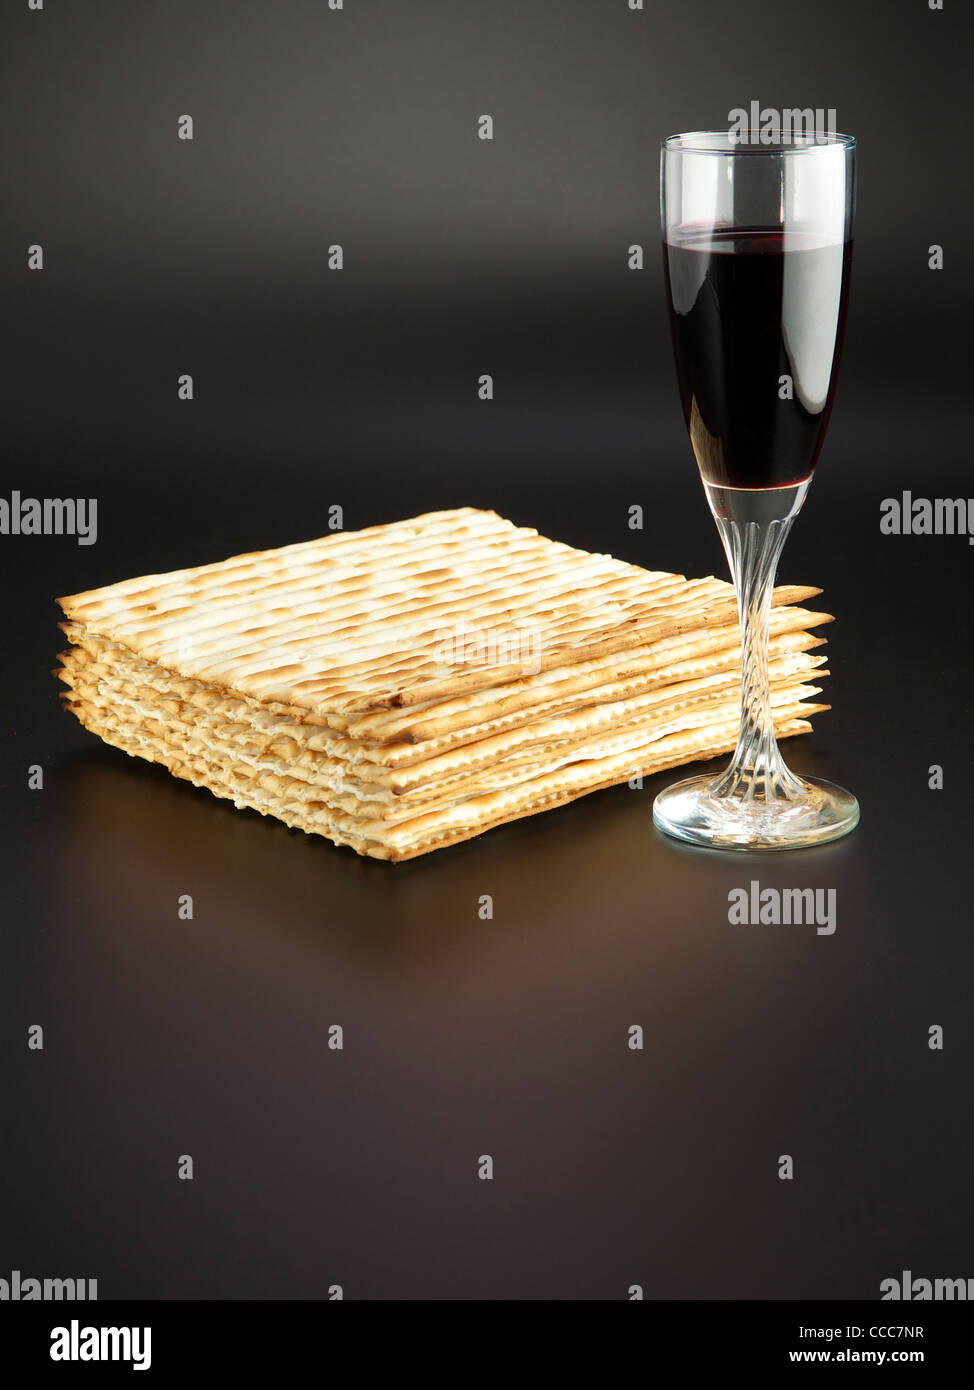 Jewish religious feast Passover traditional food Matza and red wine Stock Photo